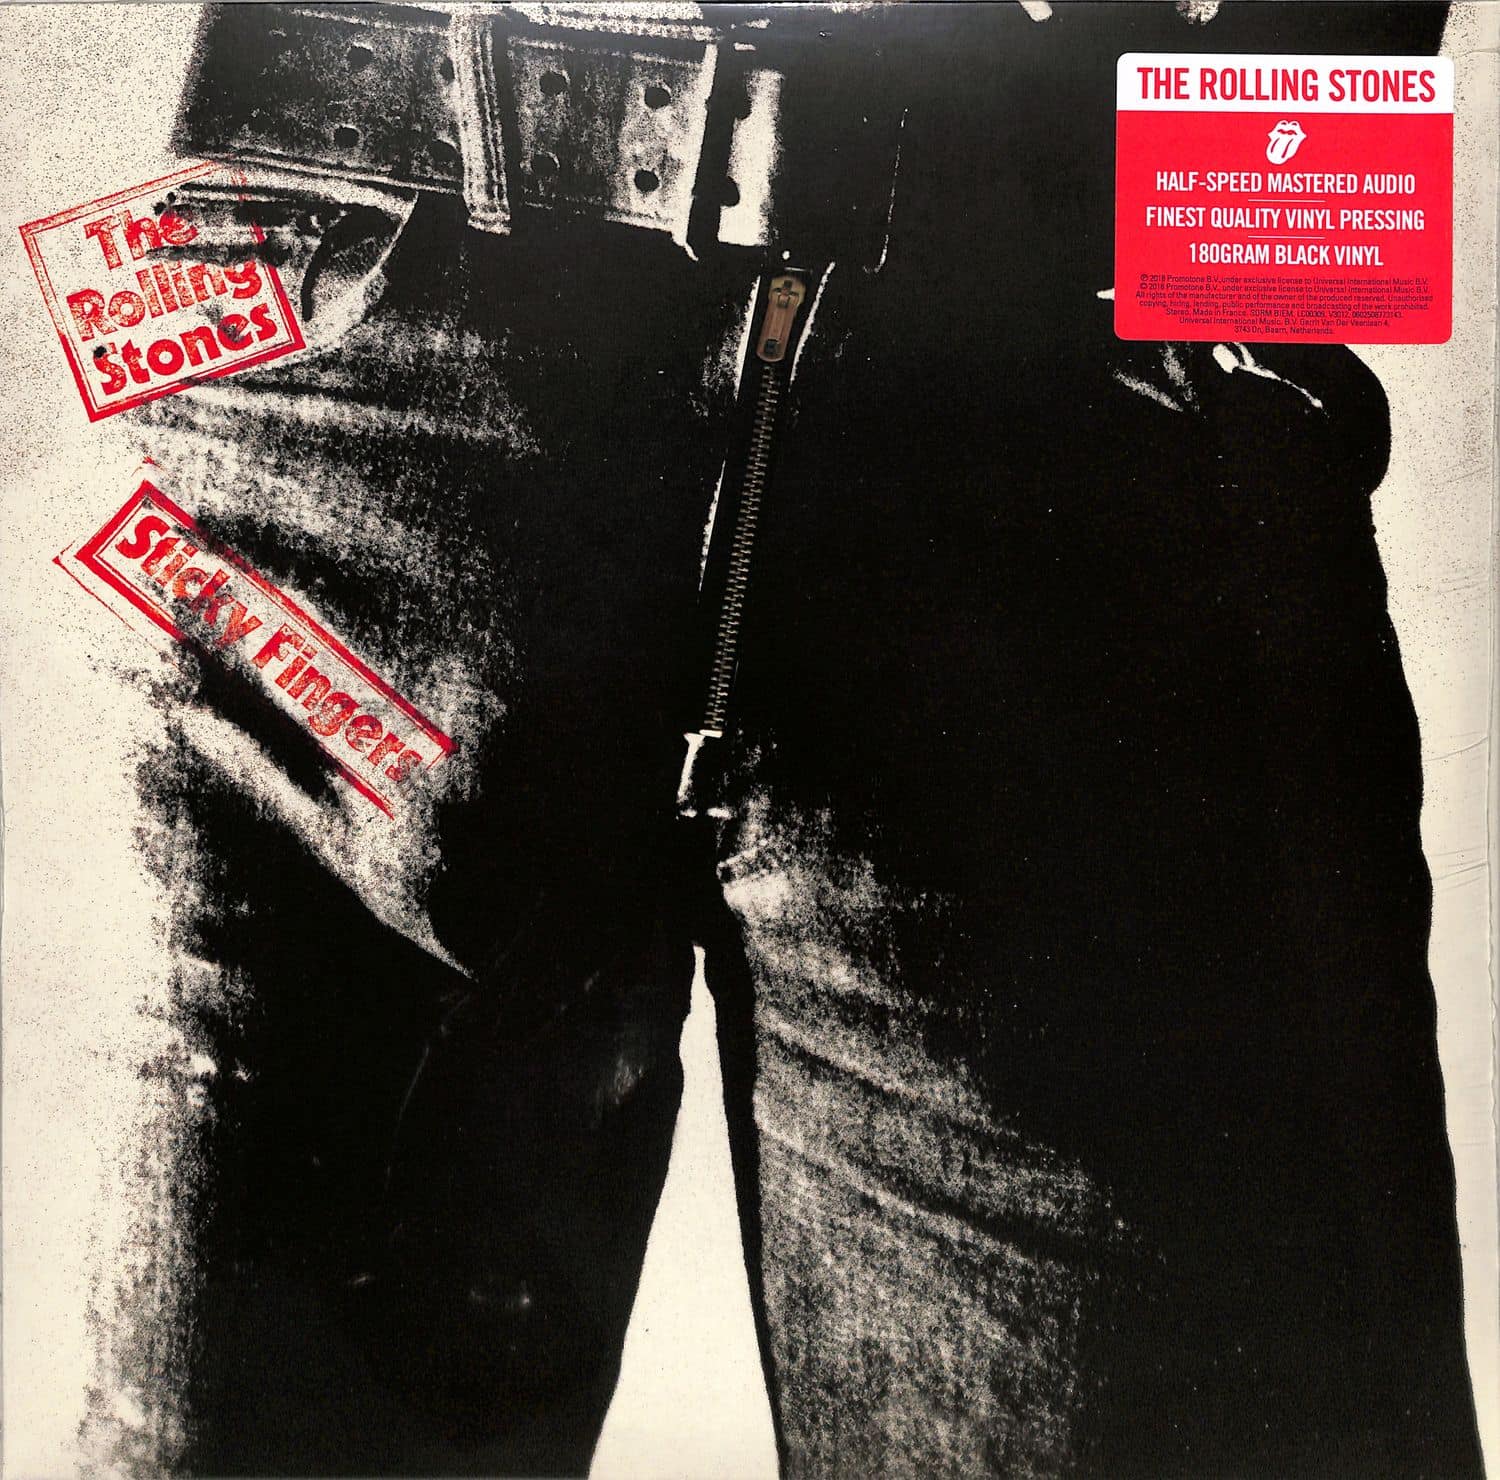 The Rolling Stones - STICKY FINGERS 